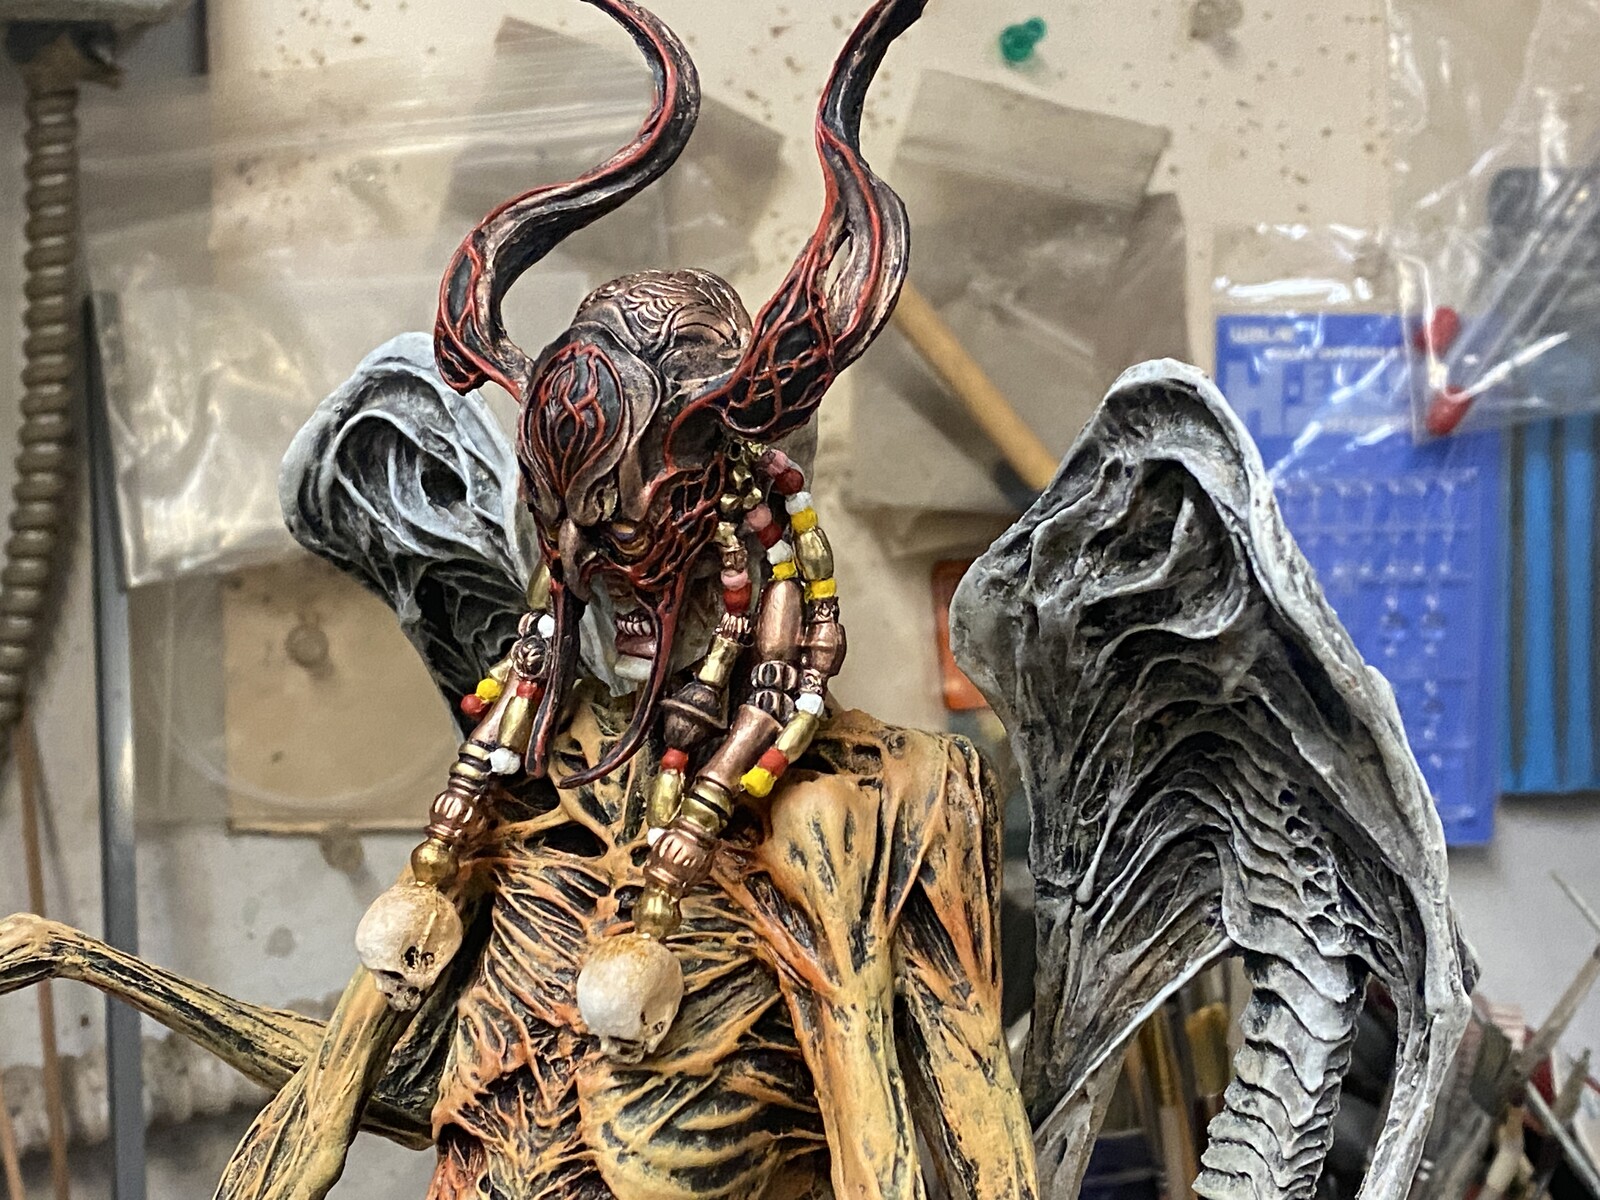 ASTAROTH Art Statue アスタロト 完成品
This piece is hand-painted and finished, 
with its own unique quality and detail 
that is the trademark of a handcrafted 
Art Of Toys custom product.
https://www.solidart.club/ 